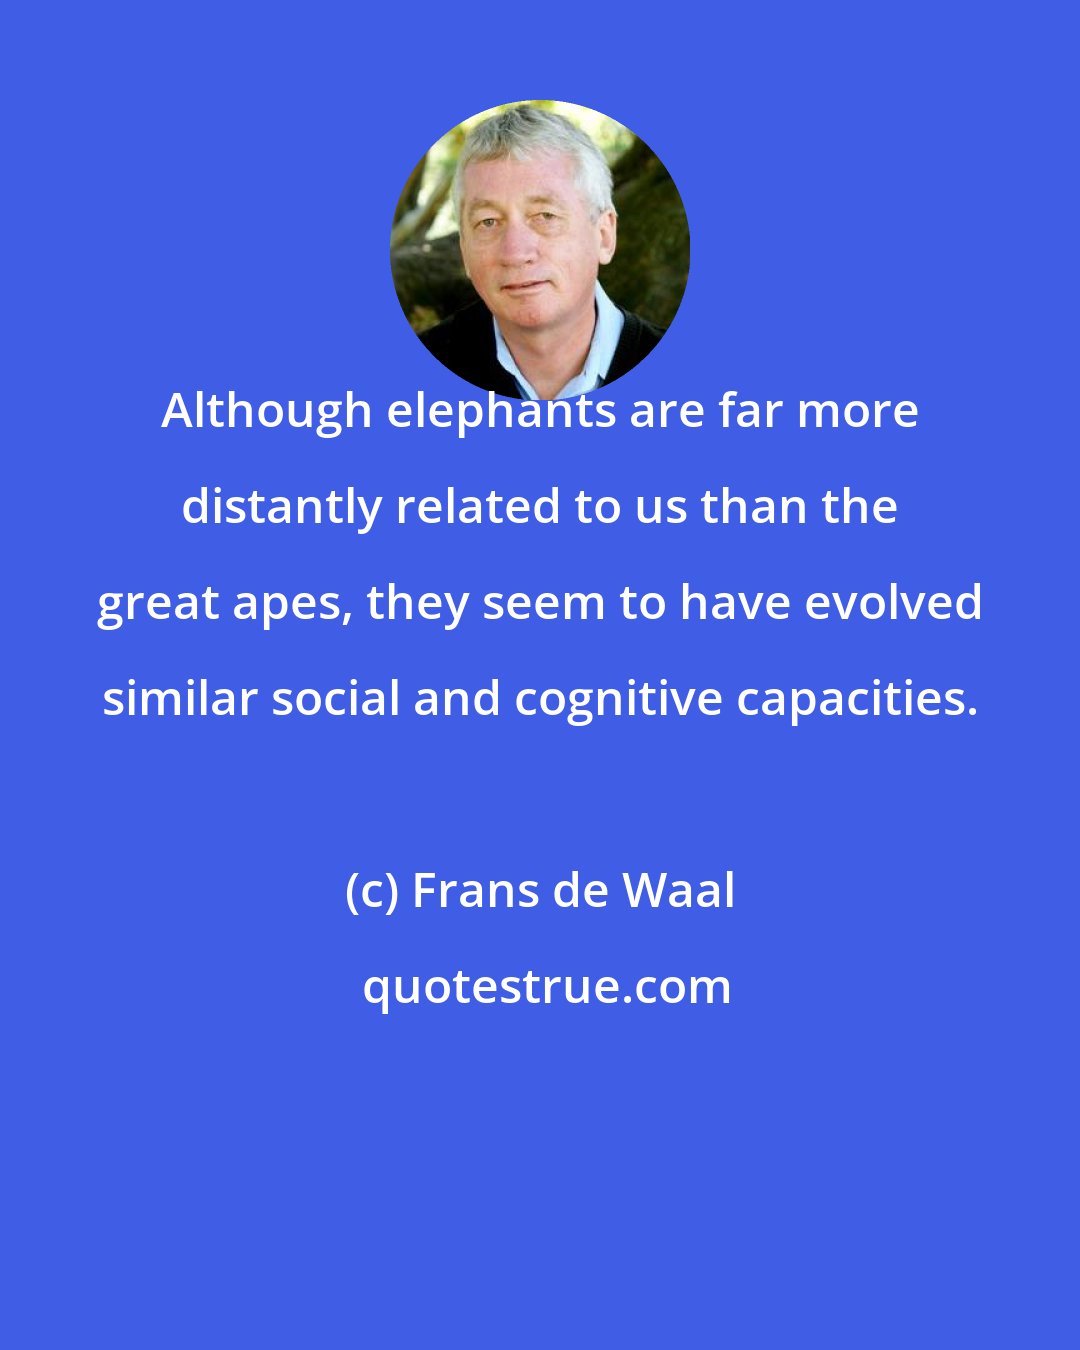 Frans de Waal: Although elephants are far more distantly related to us than the great apes, they seem to have evolved similar social and cognitive capacities.